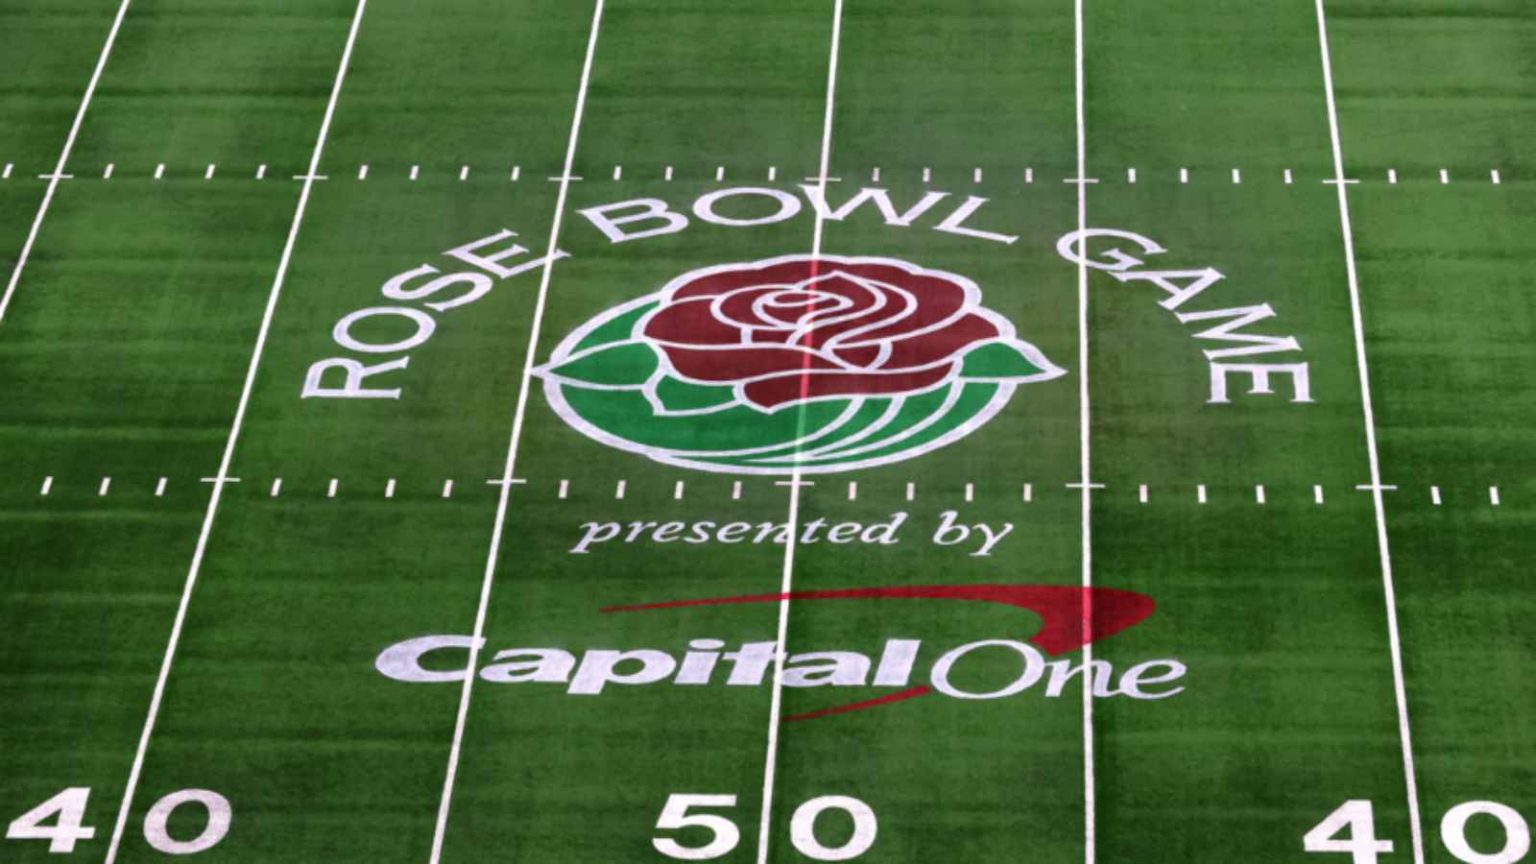 Rose Bowl Game 2023 Date, Time and Location of the game